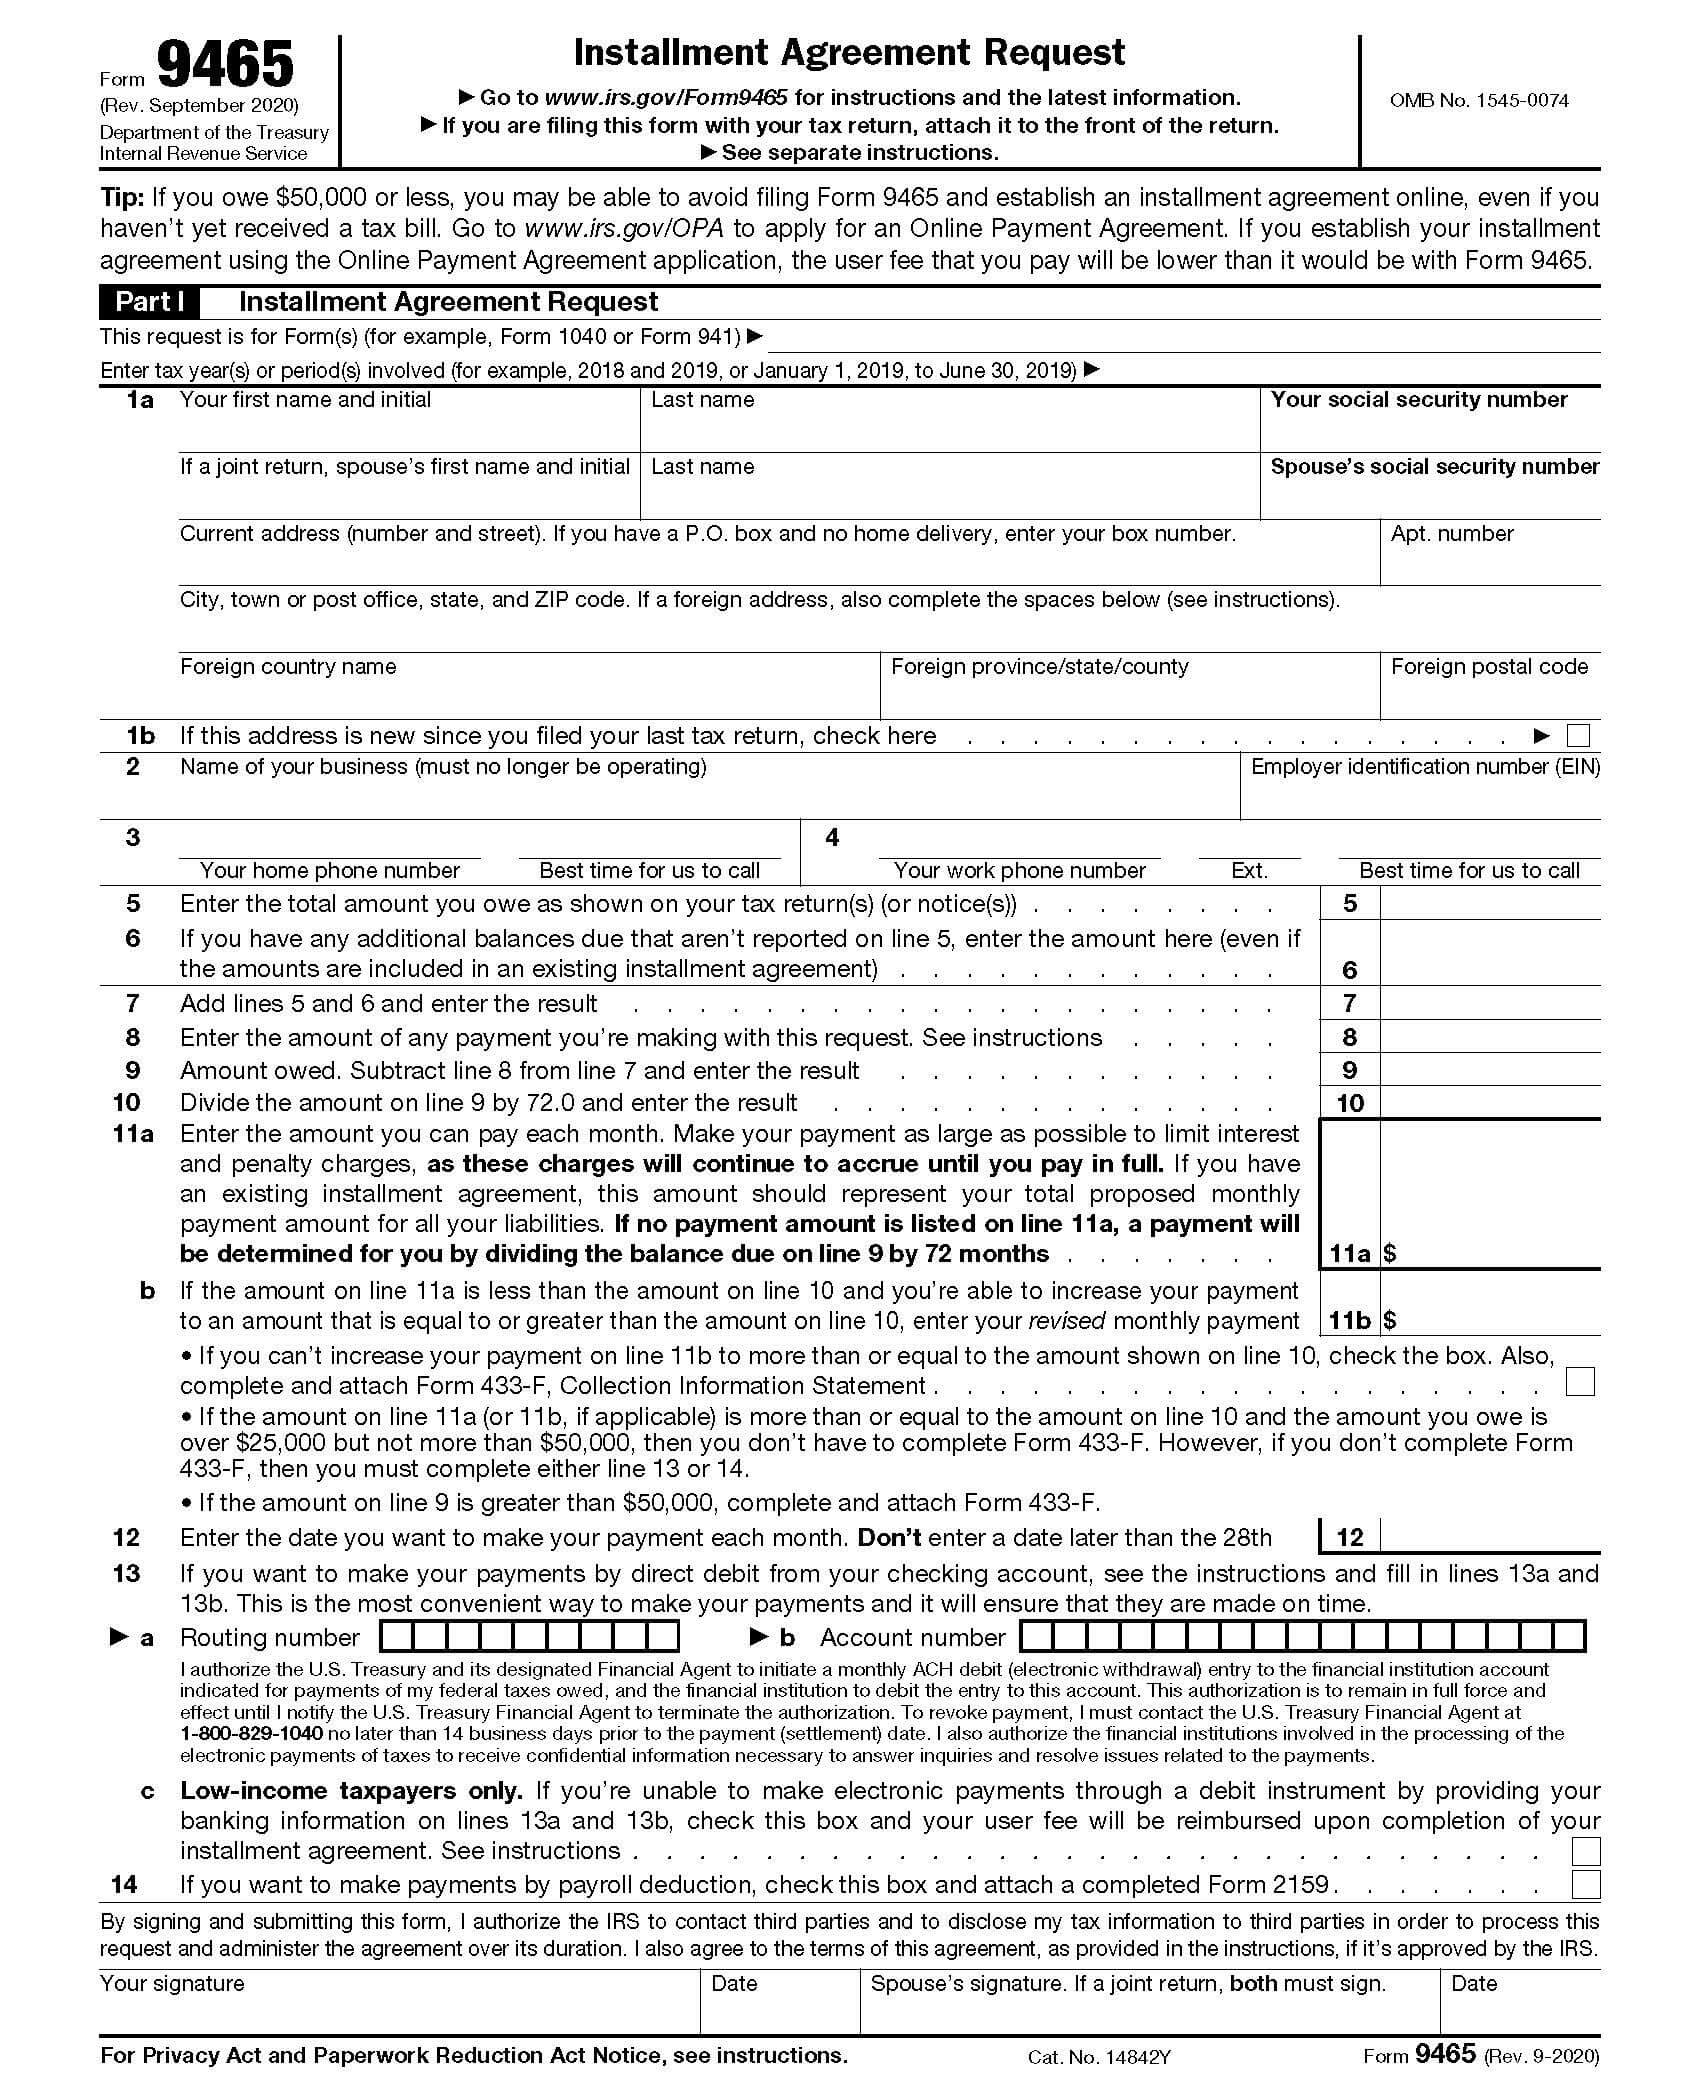 irs form-9465 part 1 example